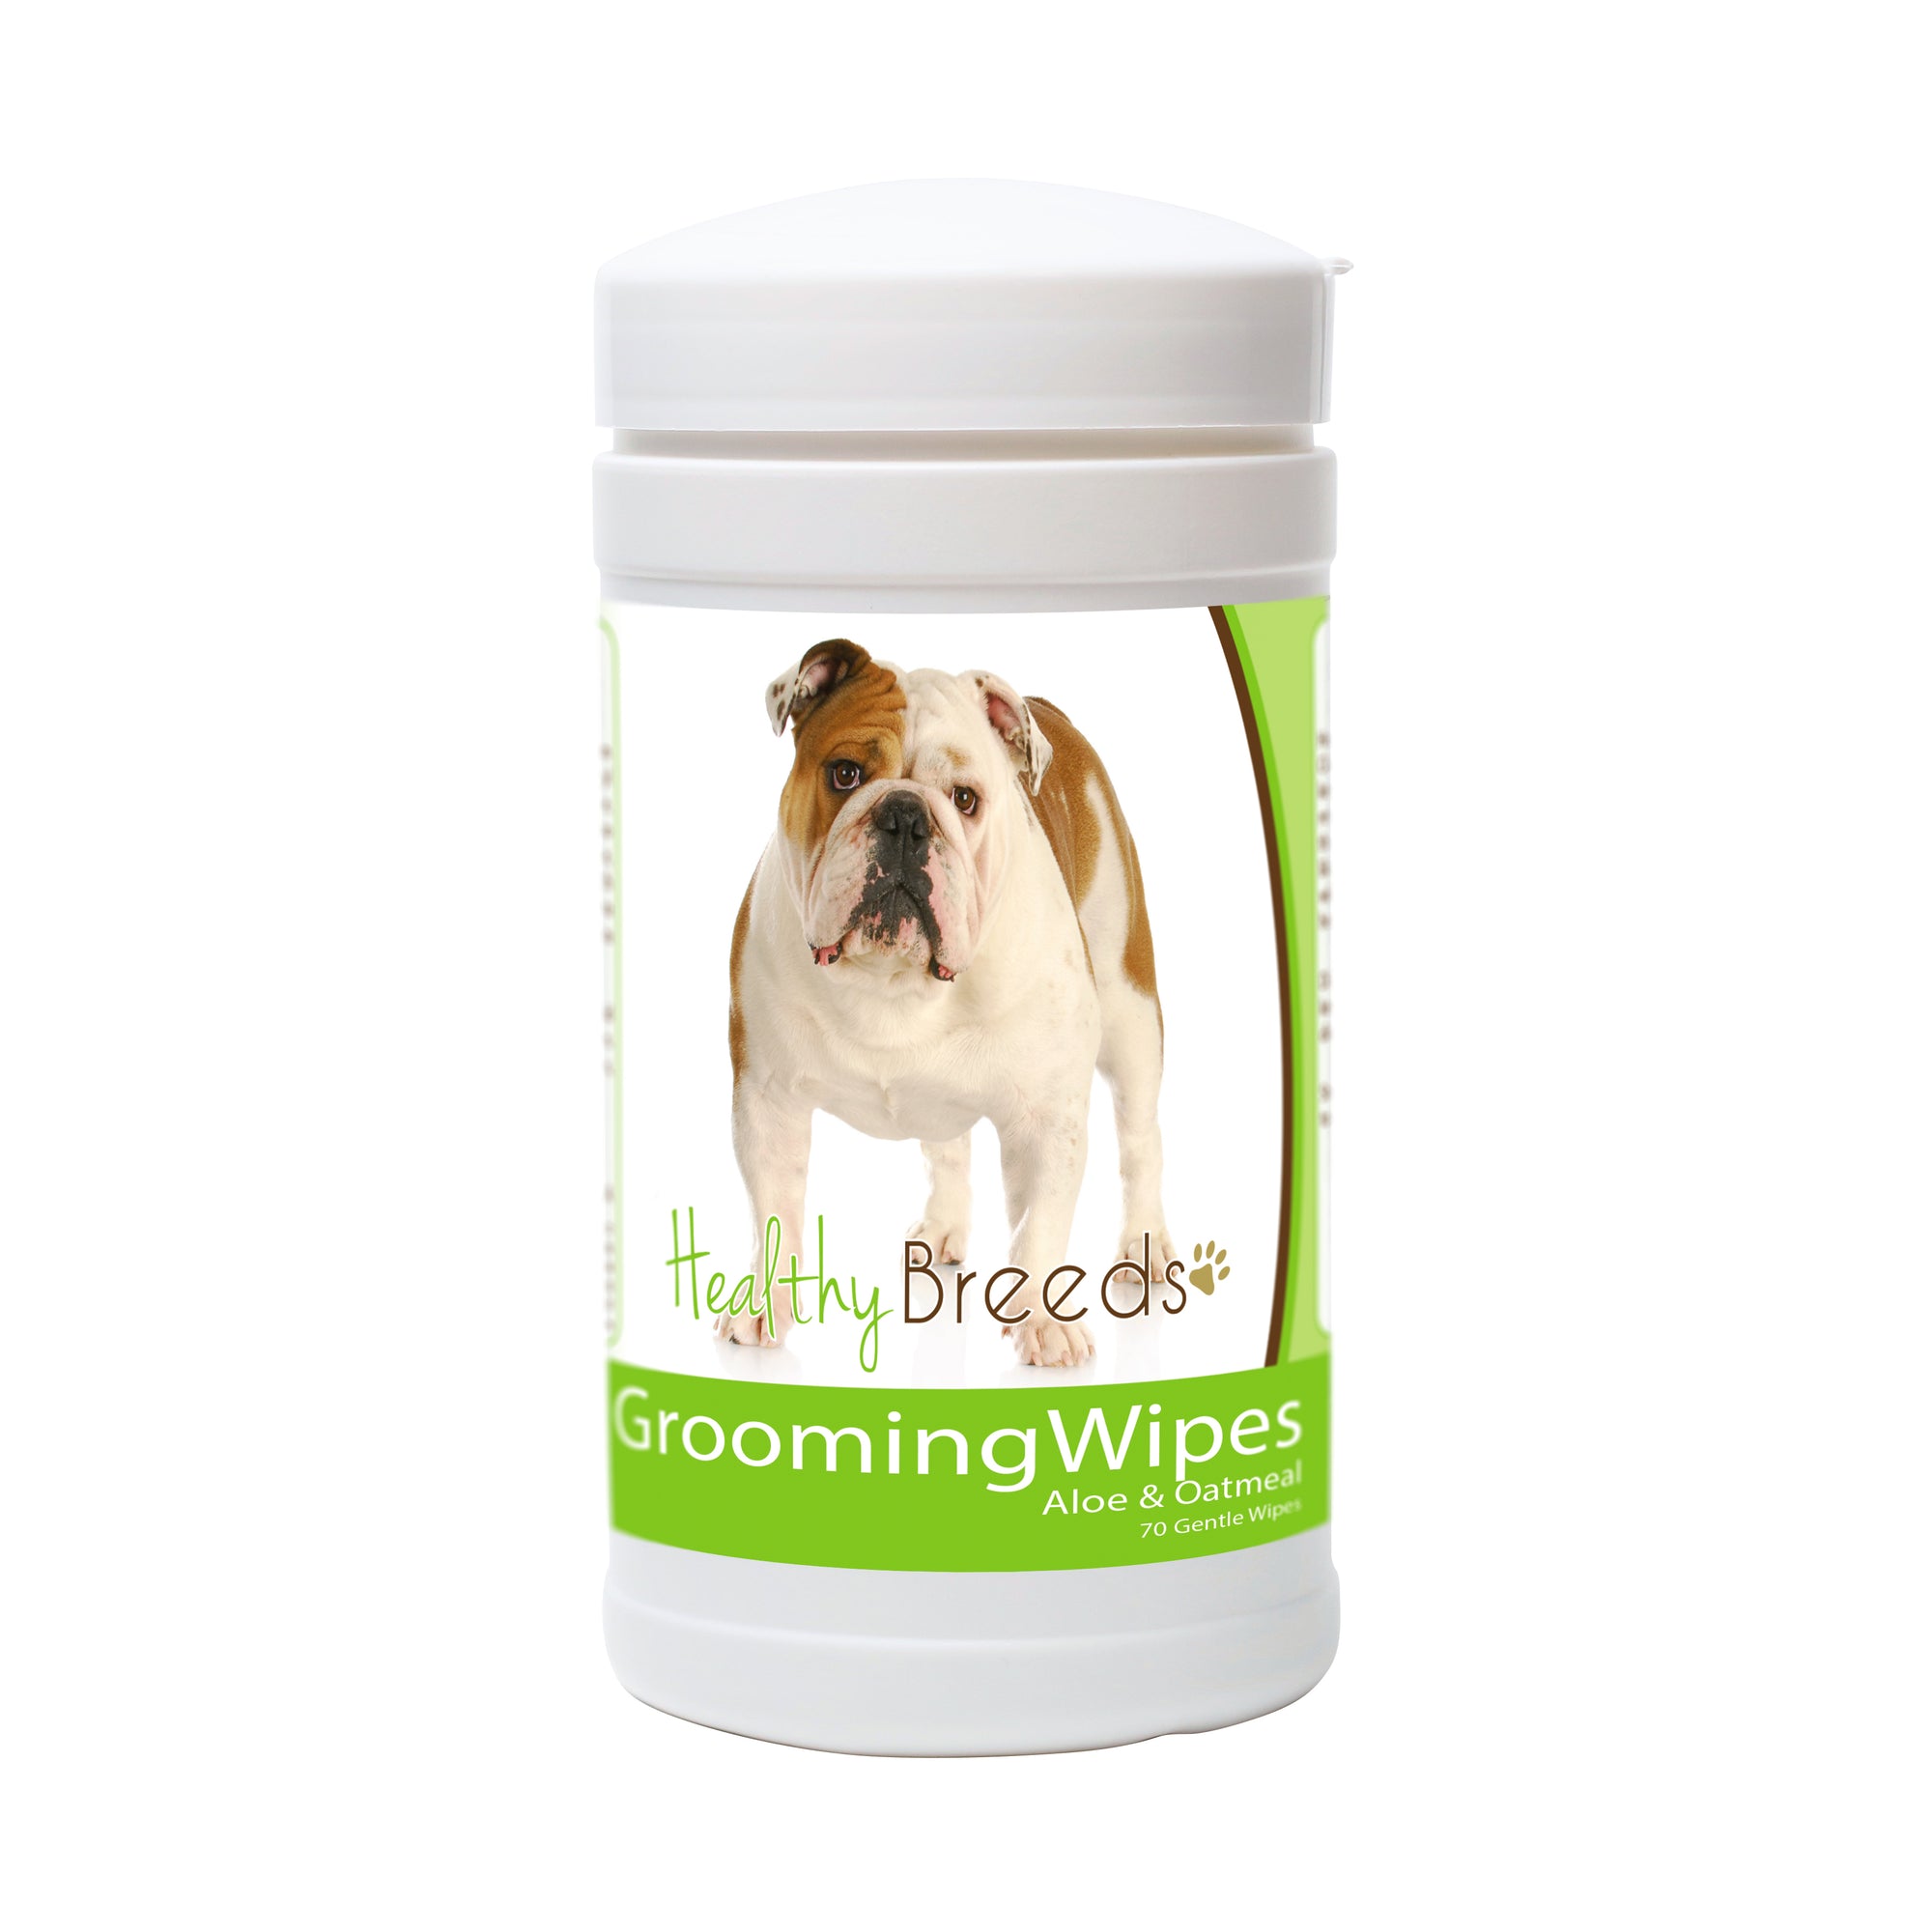 Healthy Breeds Bulldog Grooming Wipes 70 Count